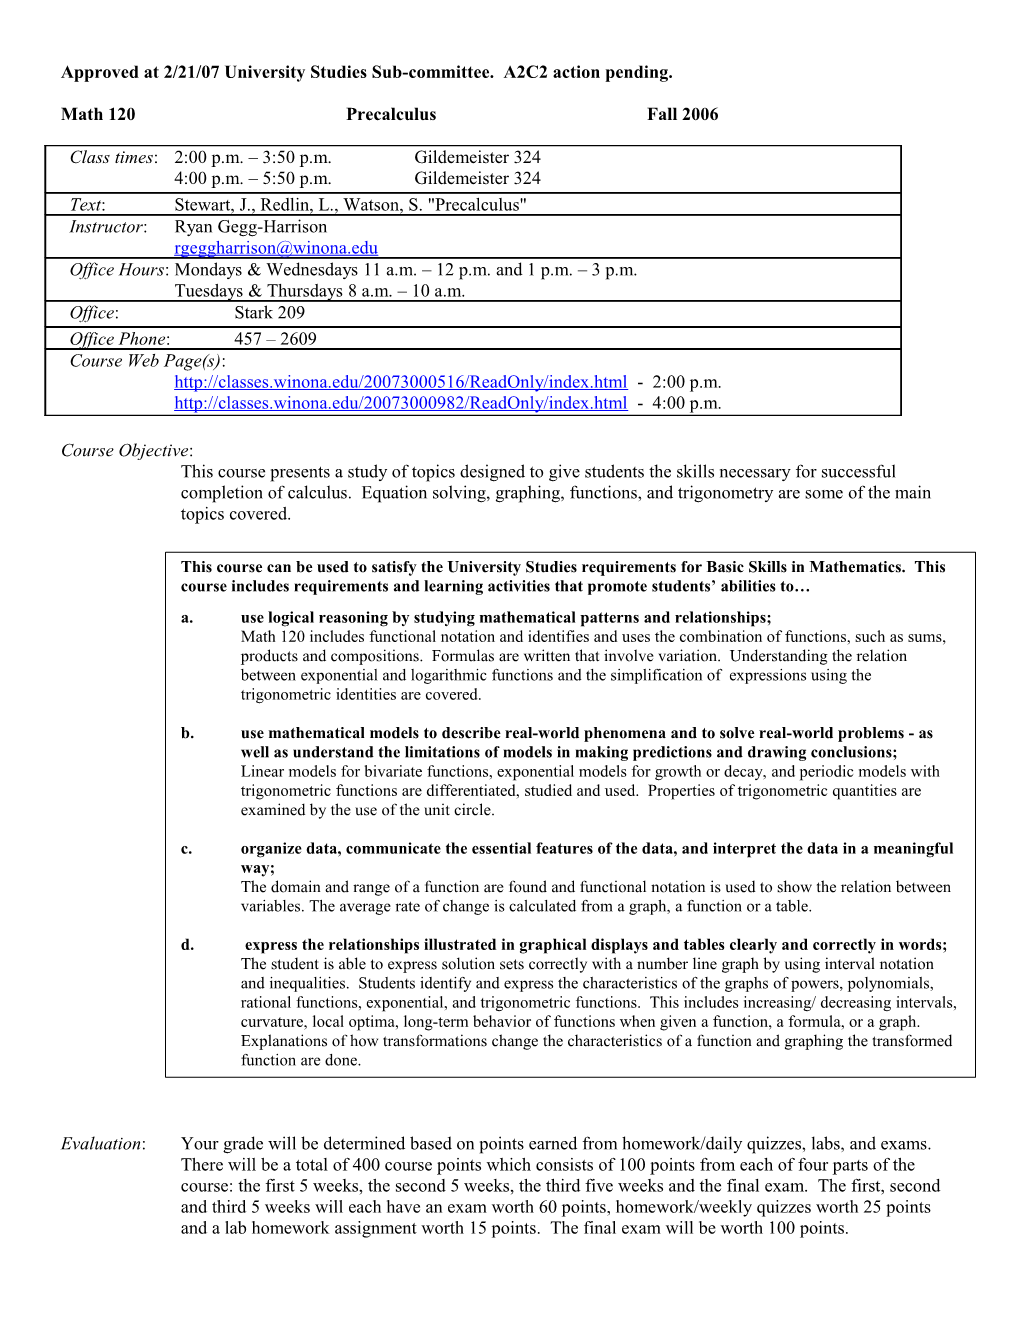 Approved at 2/21/07 University Studies Sub-Committee. A2C2 Action Pending